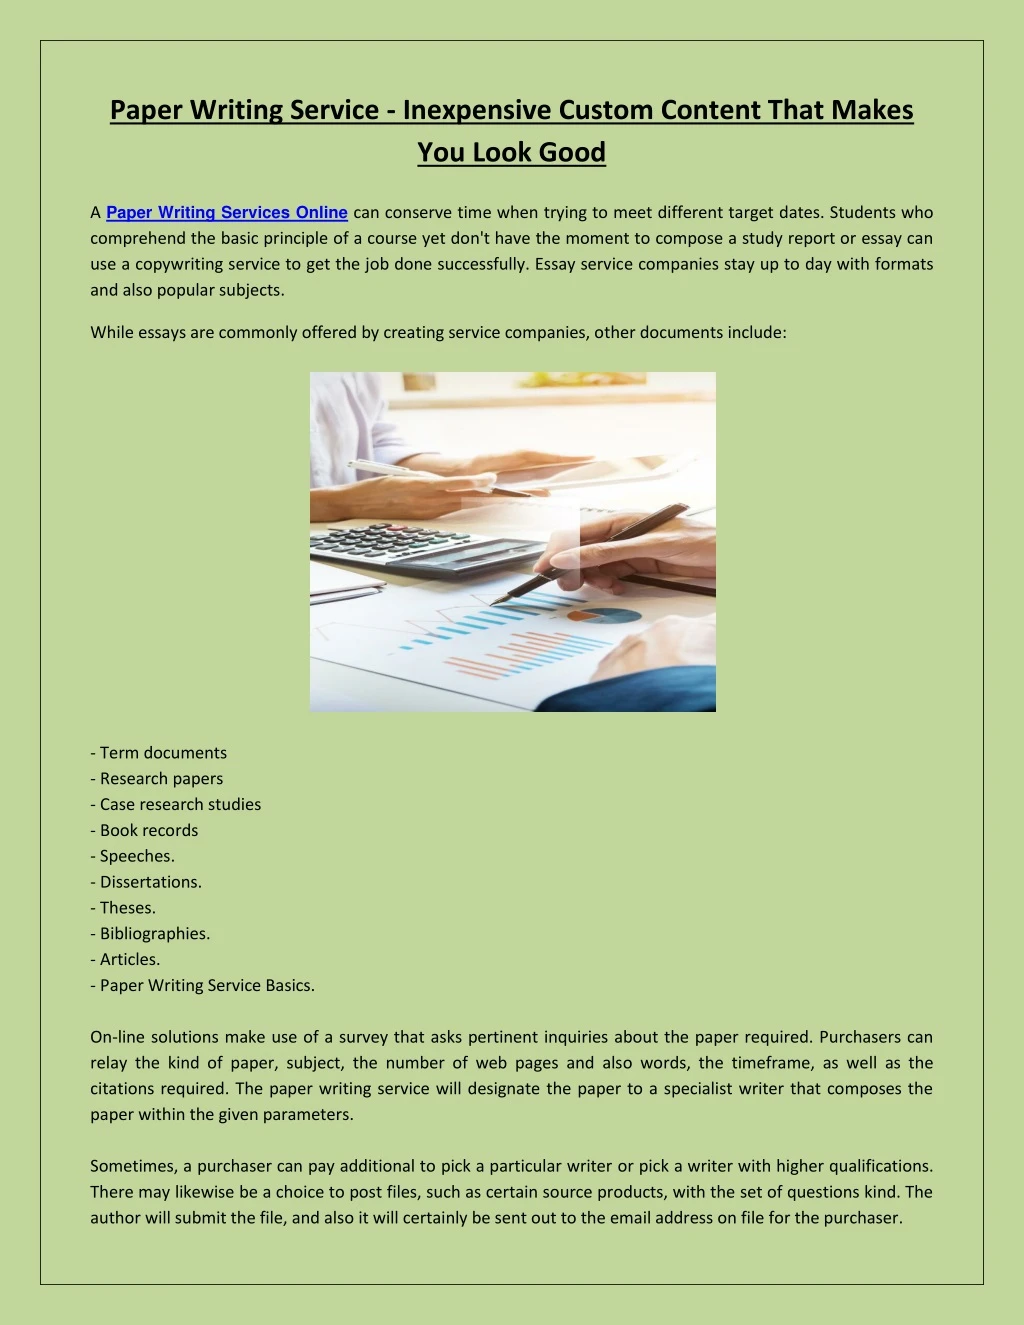 paper writing service inexpensive custom content